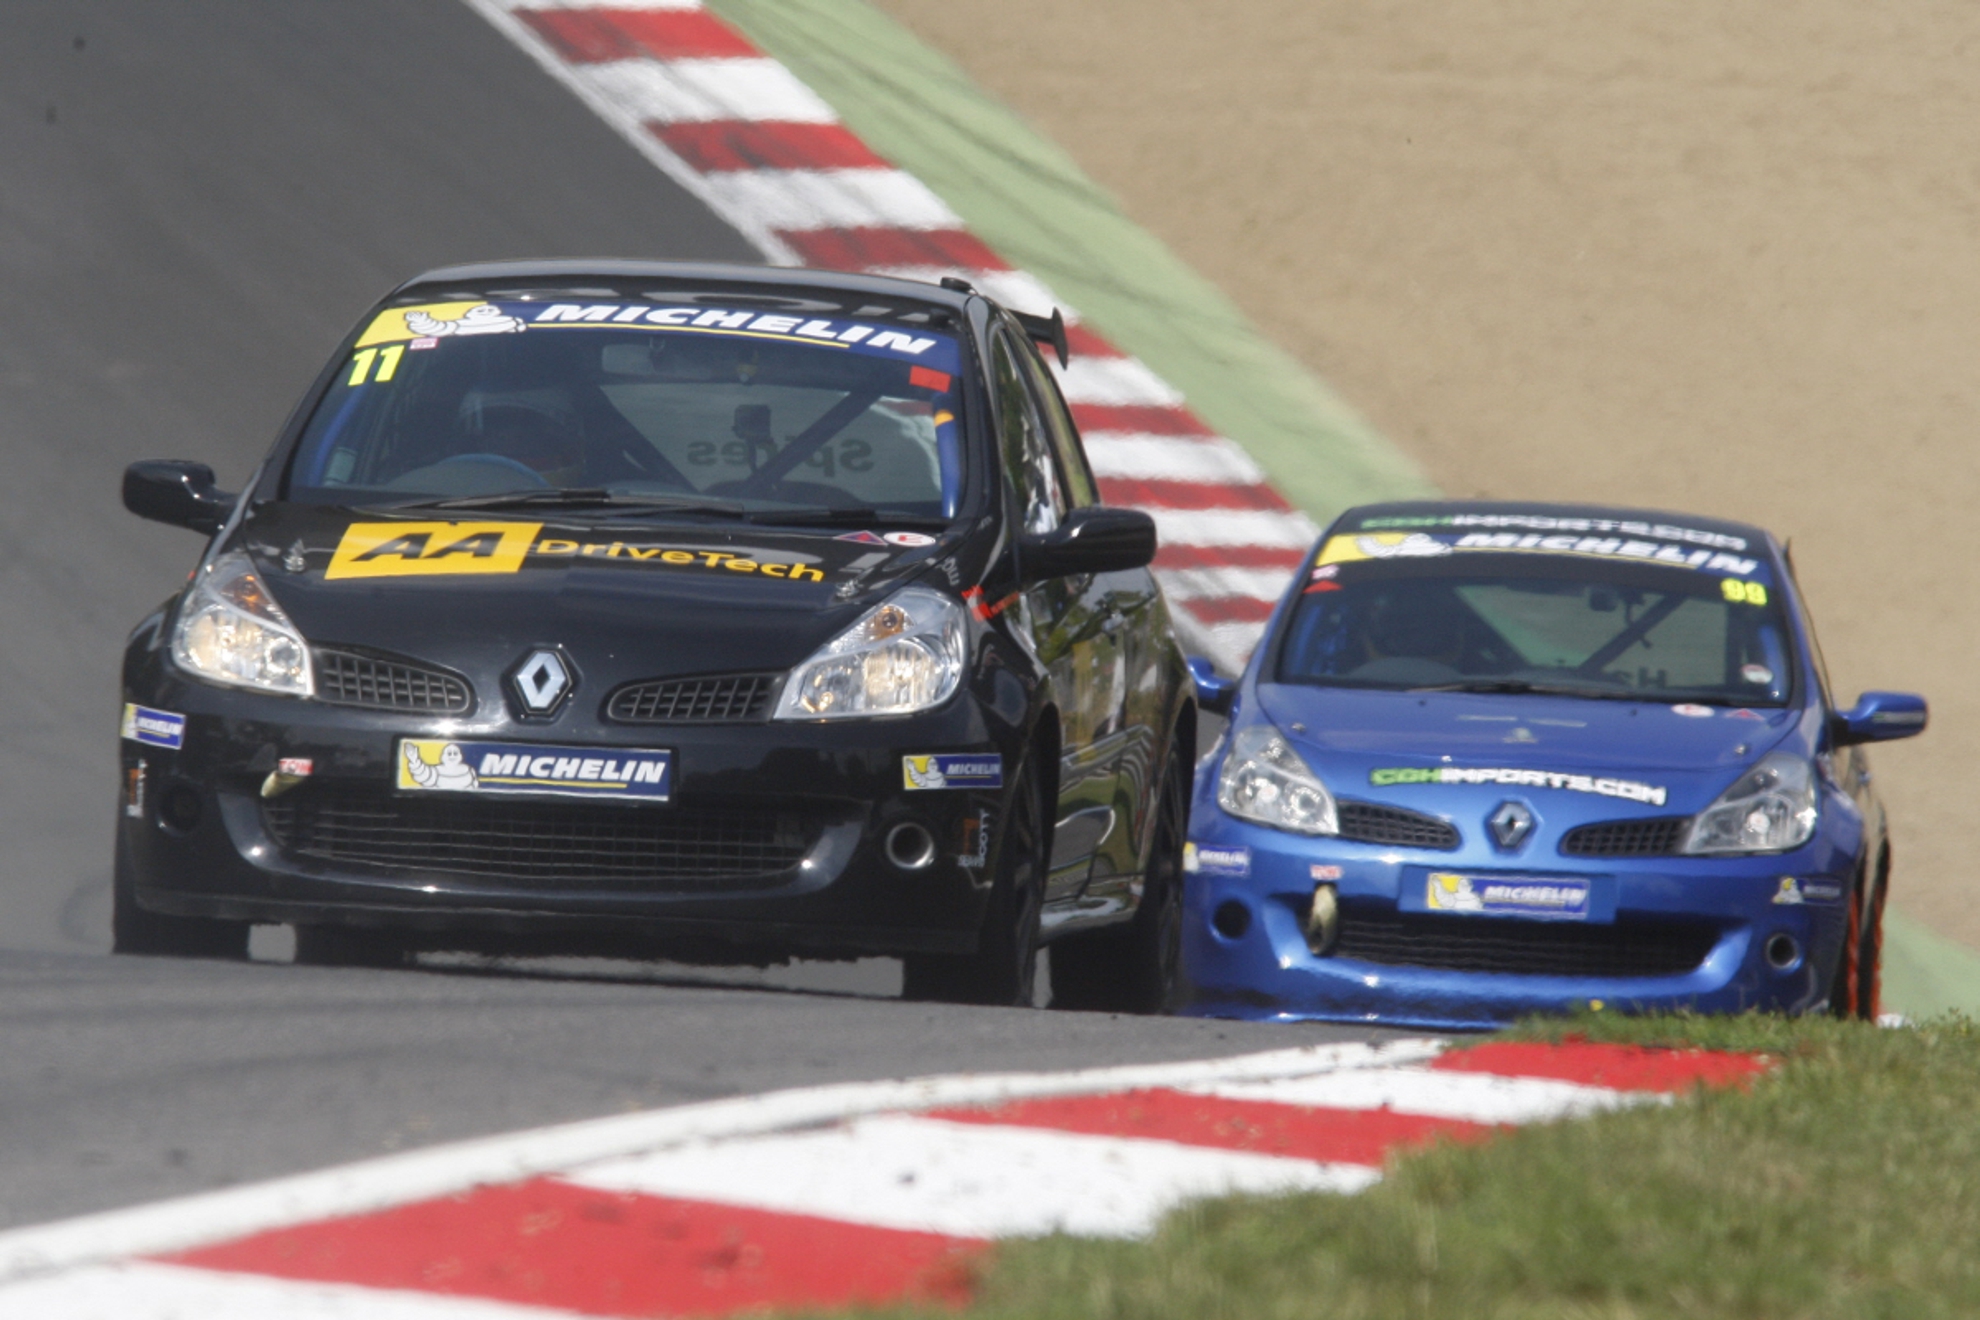 MICHELIN CLIO CUP SERIES READY FOR FIRST EVER LIVE TELEVISED EVENT